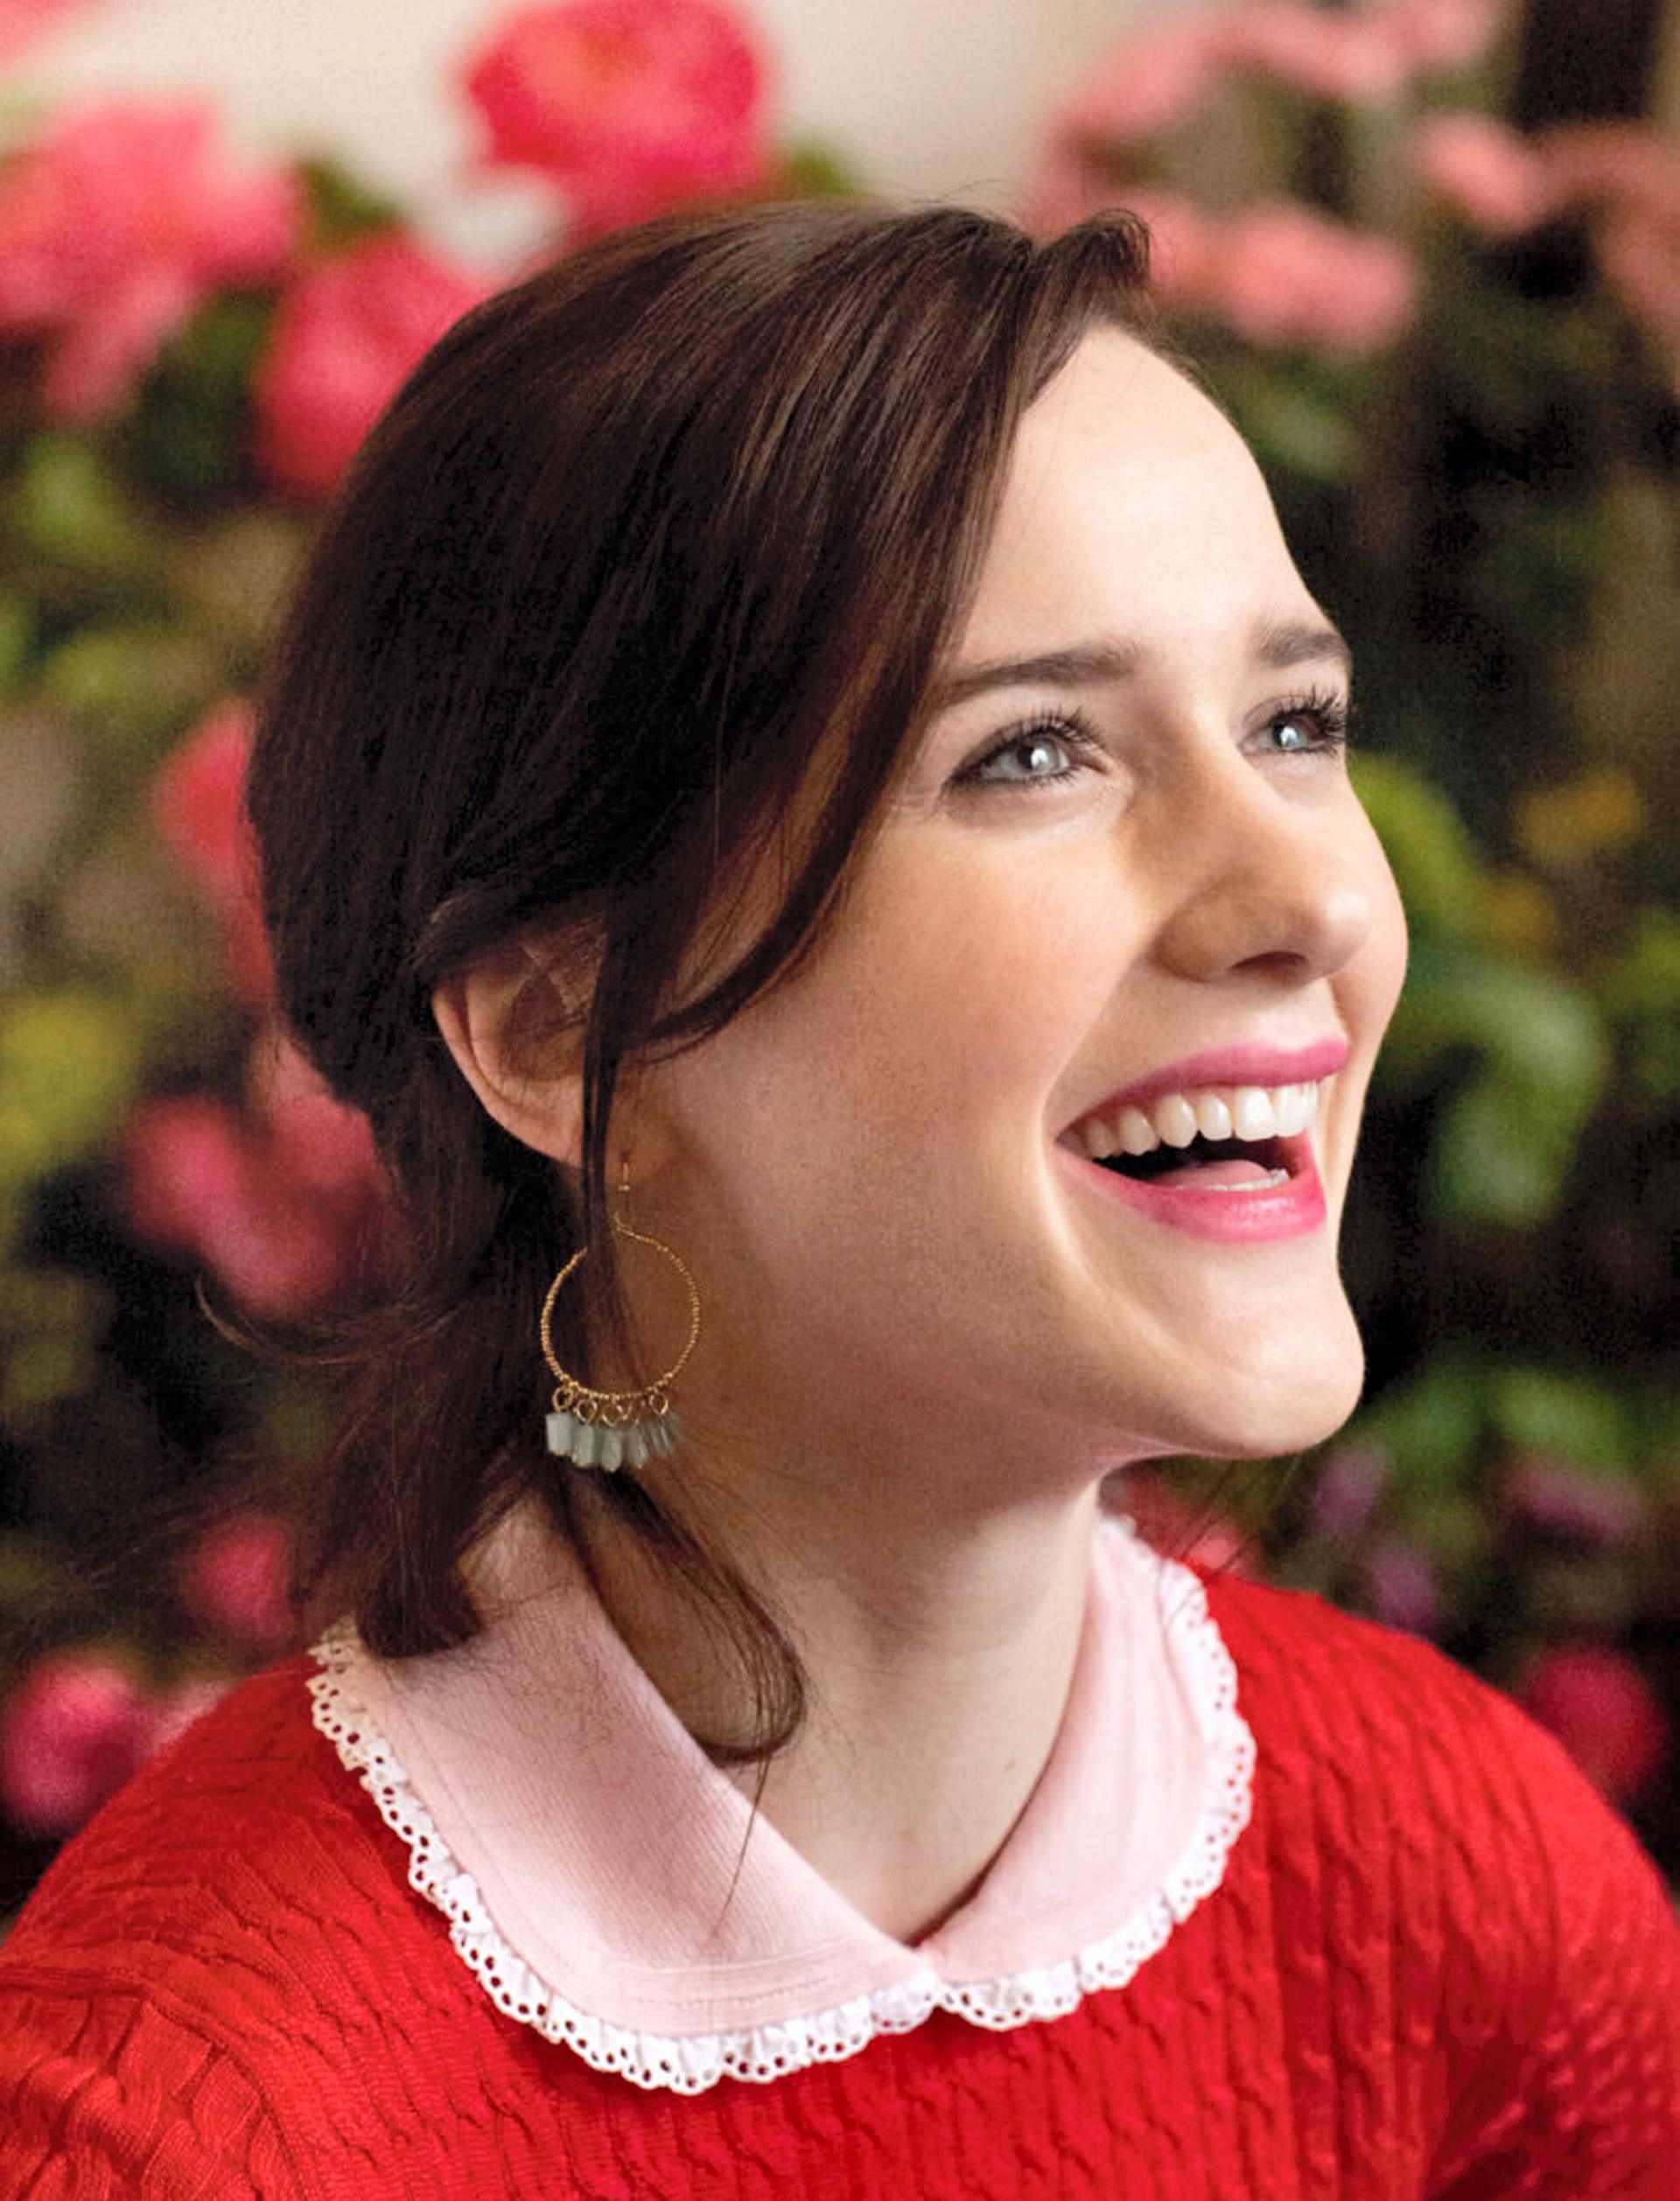 Rachel Brosnahan Is the New Face of Aunt Kate Spade's Label